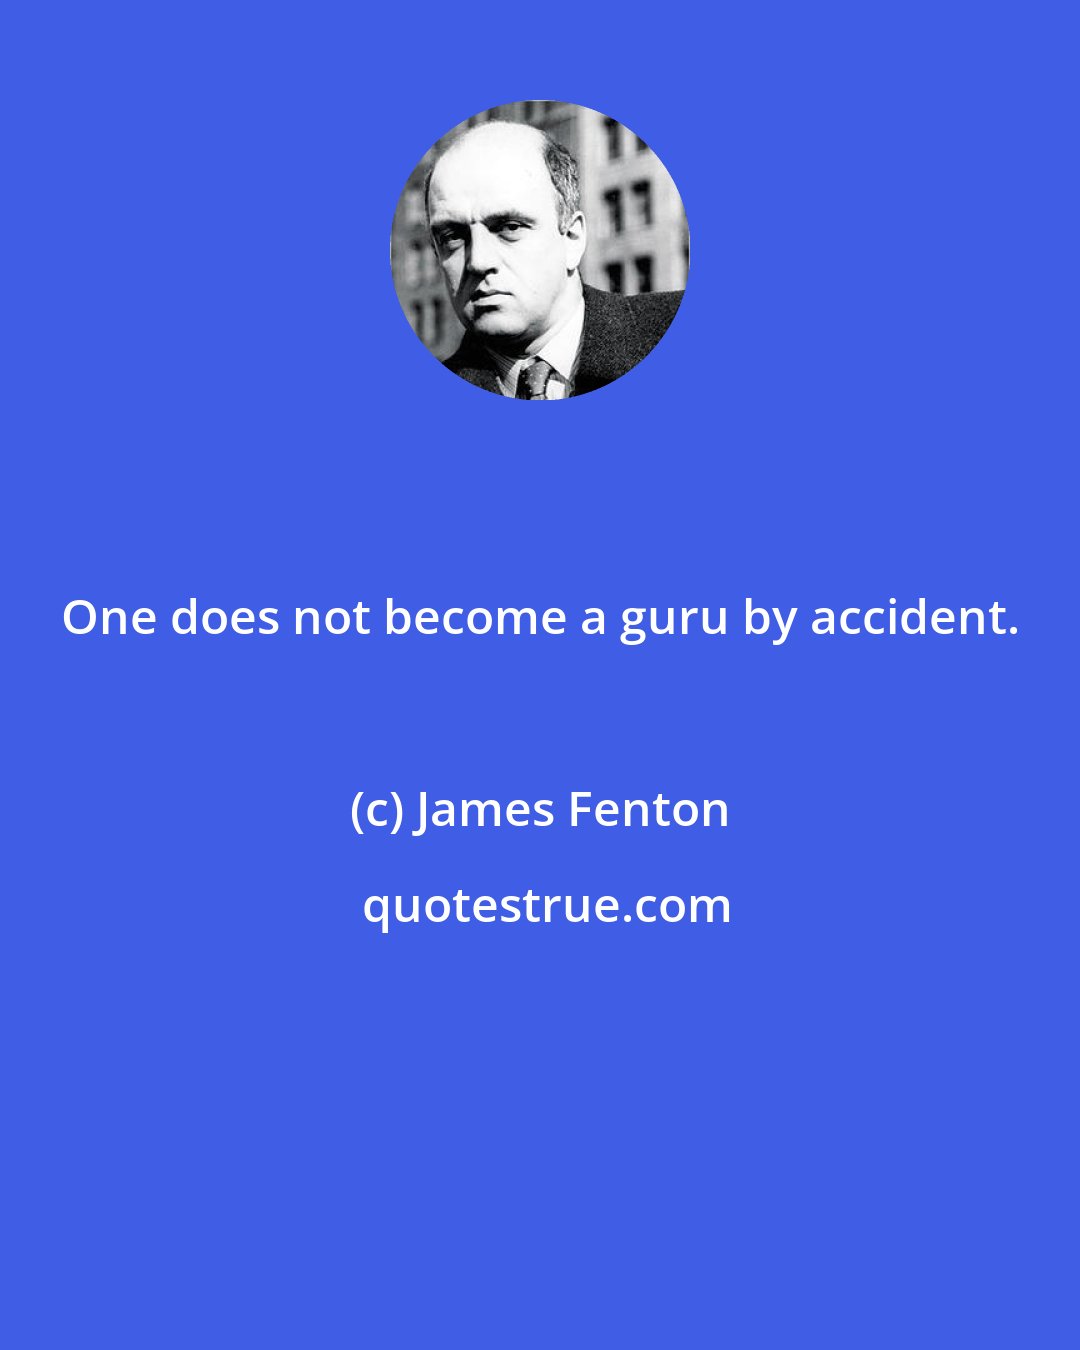 James Fenton: One does not become a guru by accident.